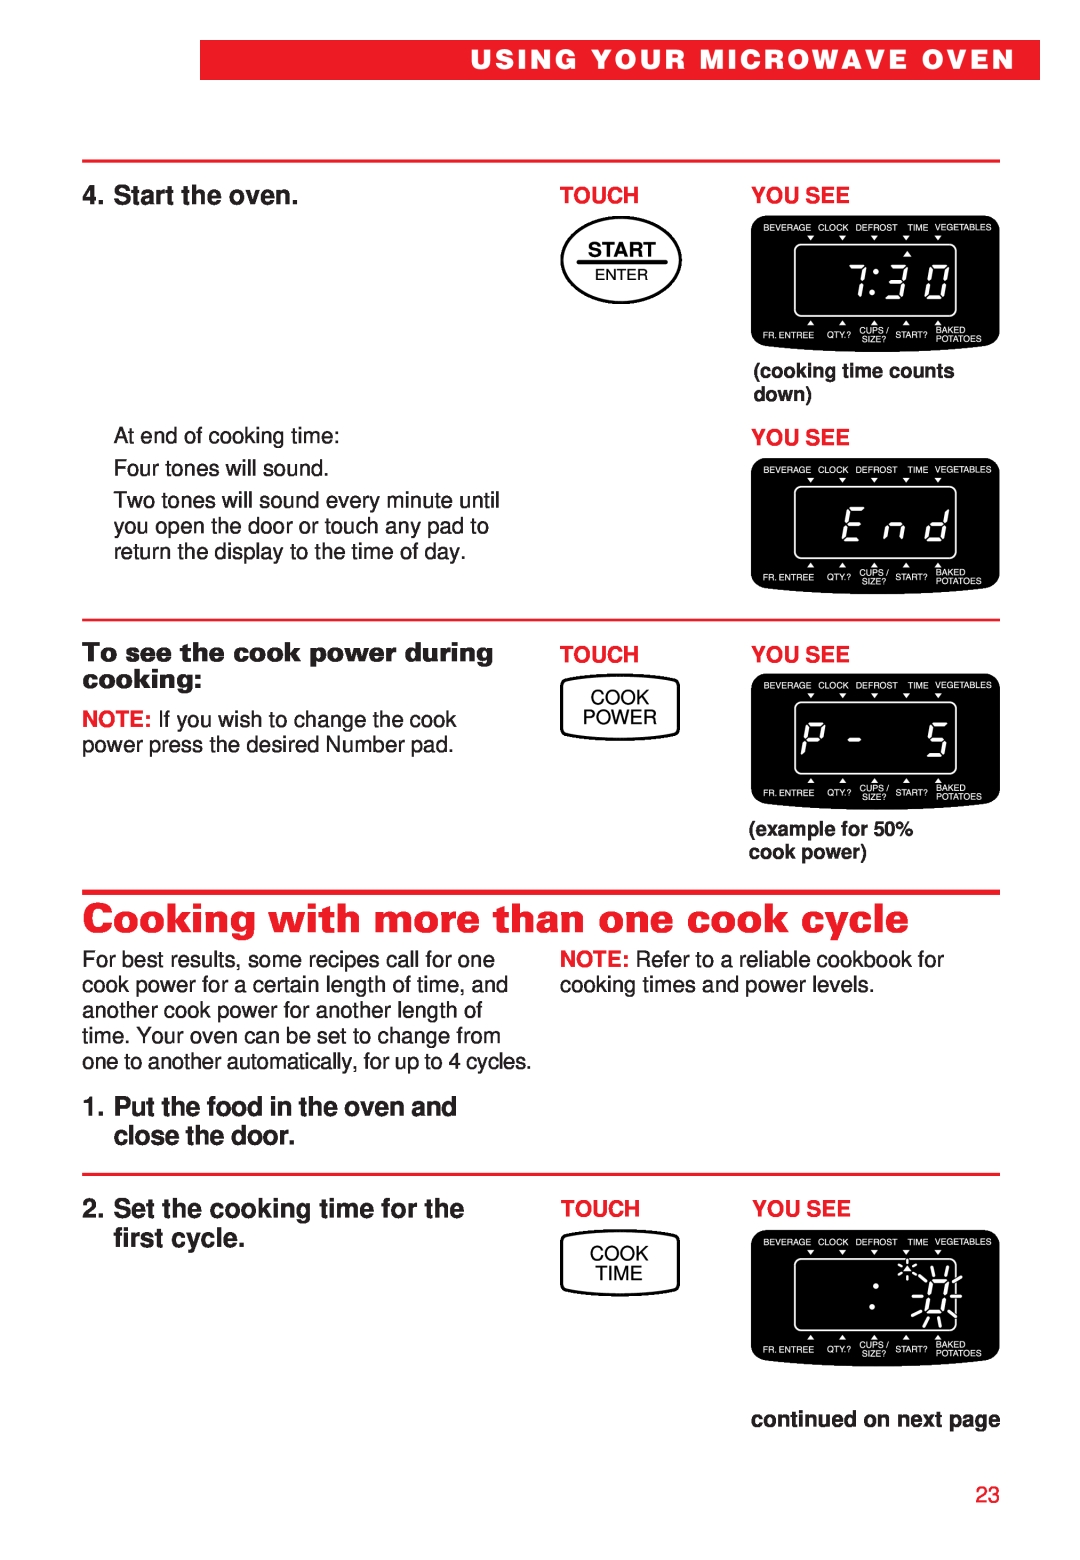 Whirlpool YMT8068SE, MT8066SE Cooking with more than one cook cycle, Start the oven, To see the cook power during cooking 